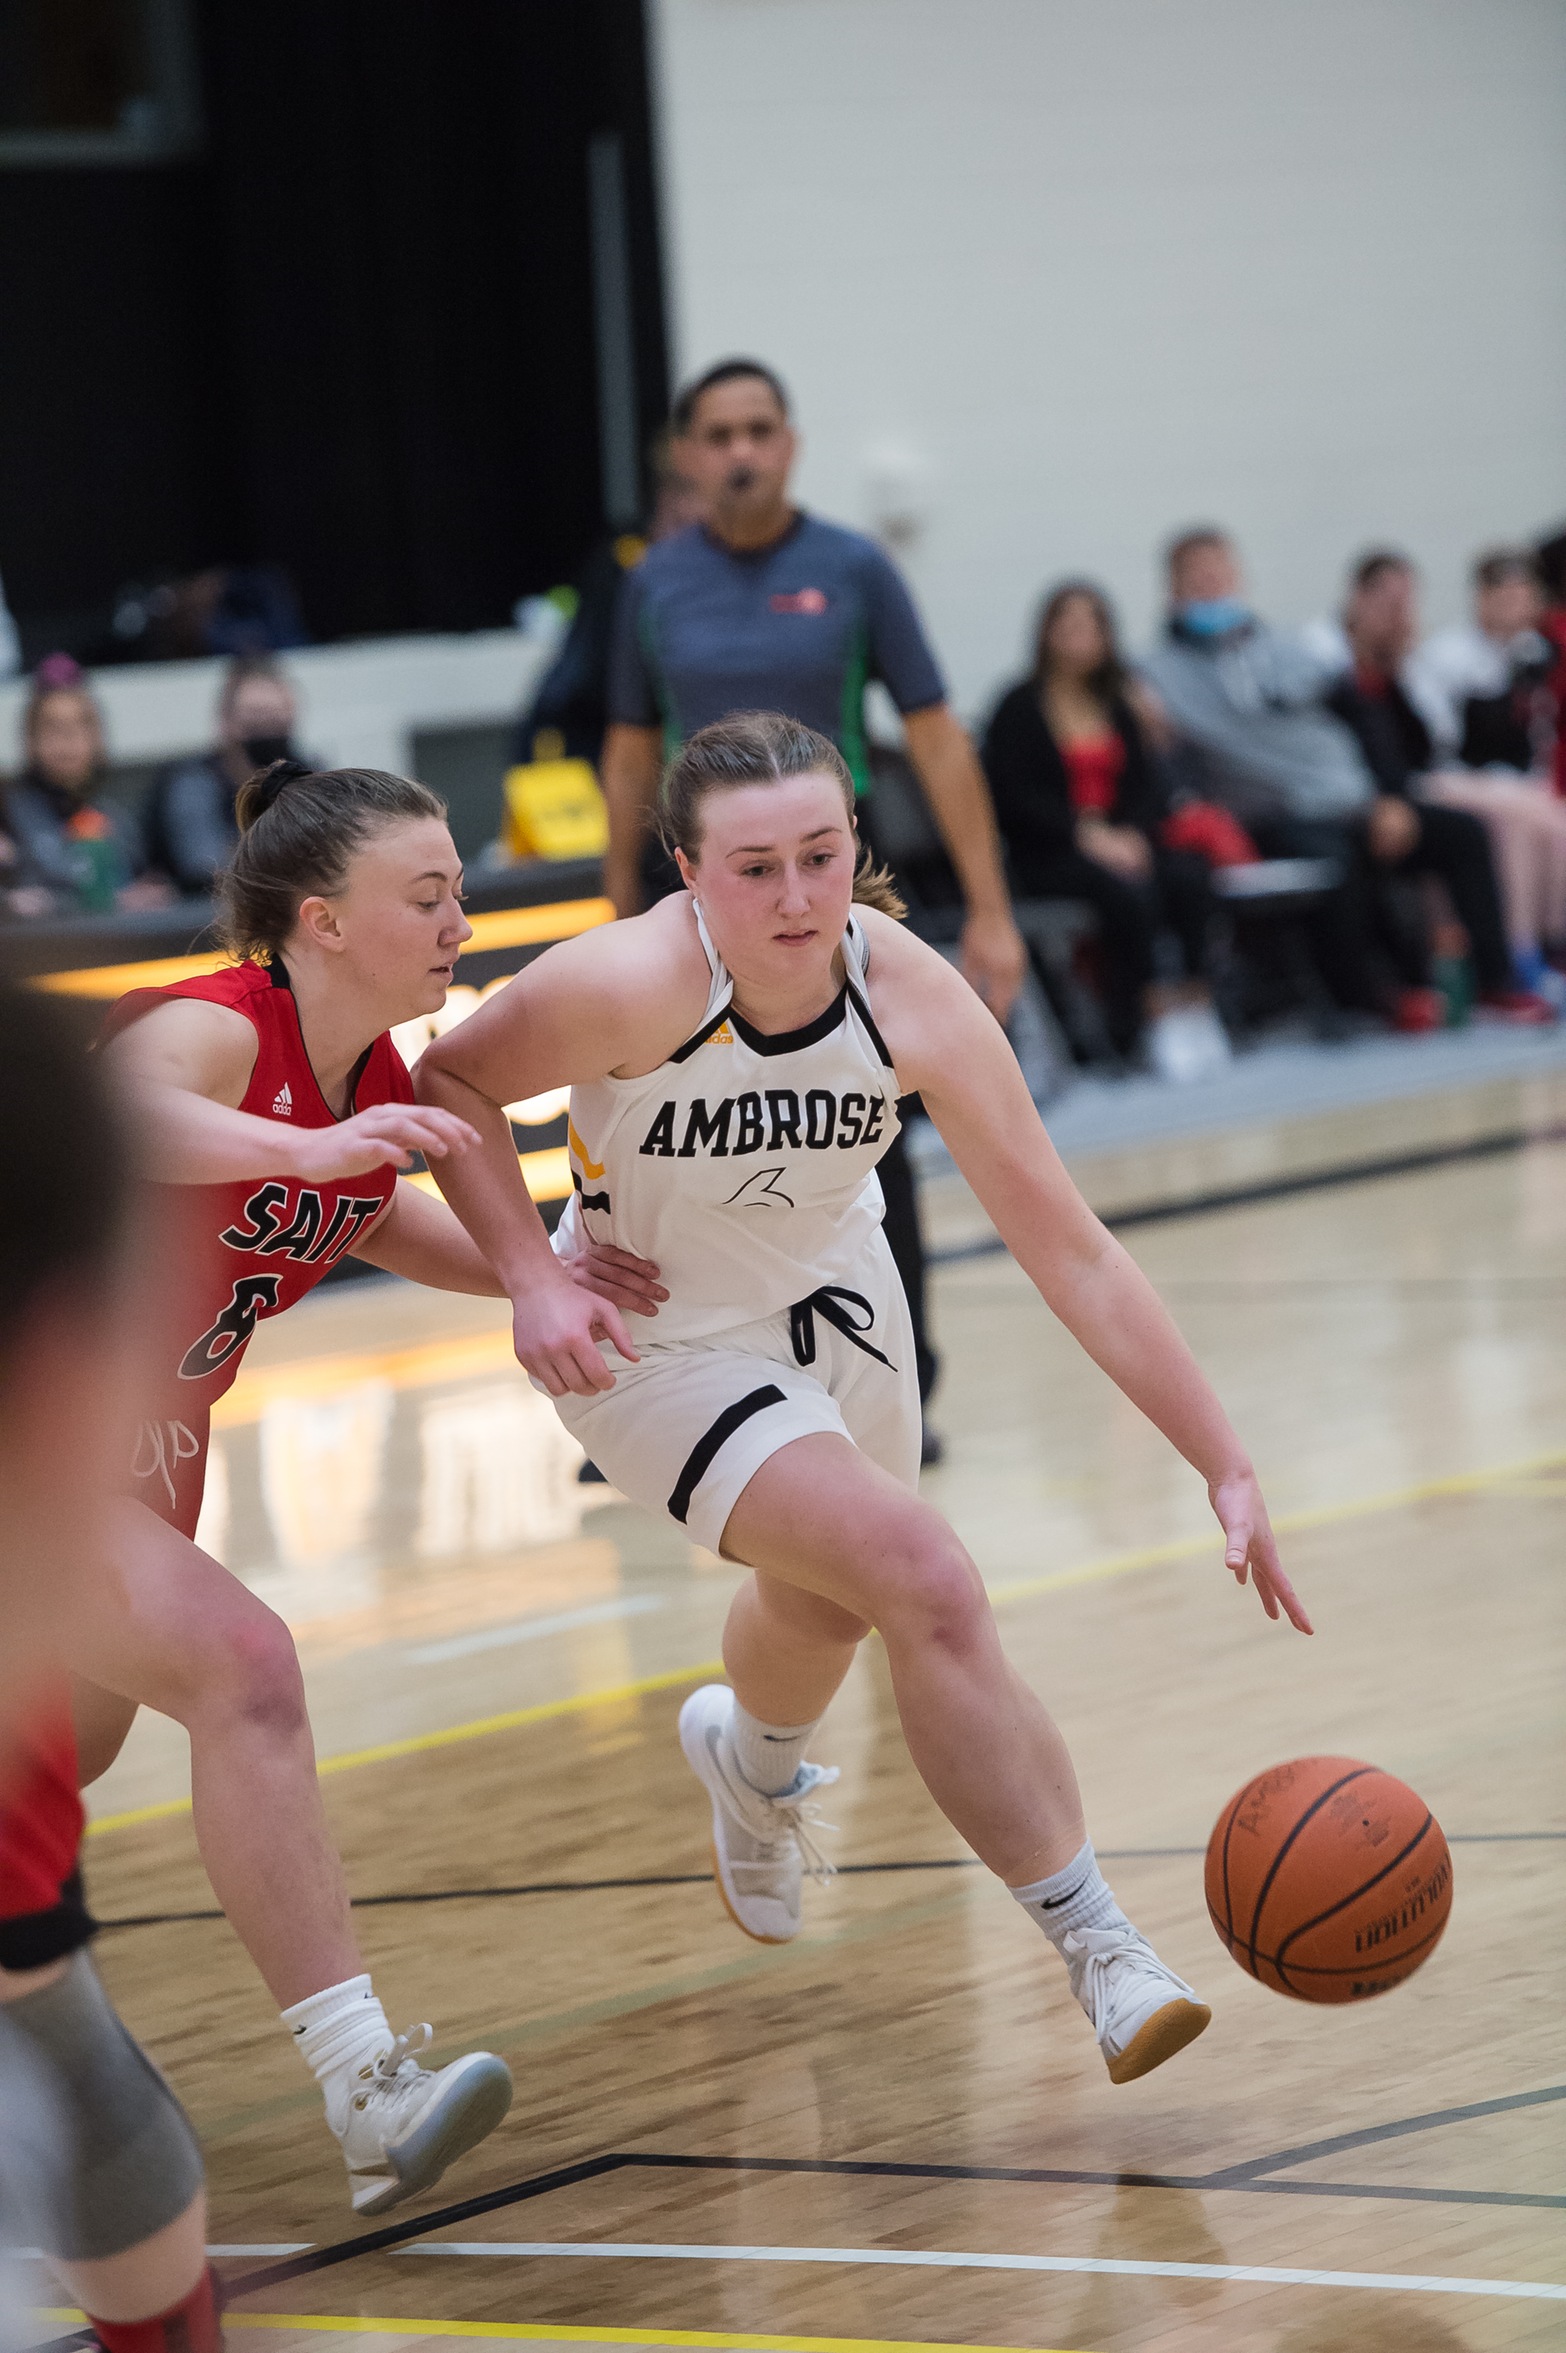 Ambrose Lions battle the Medicine Hat College Rattlers, looking for their first win of 2022.